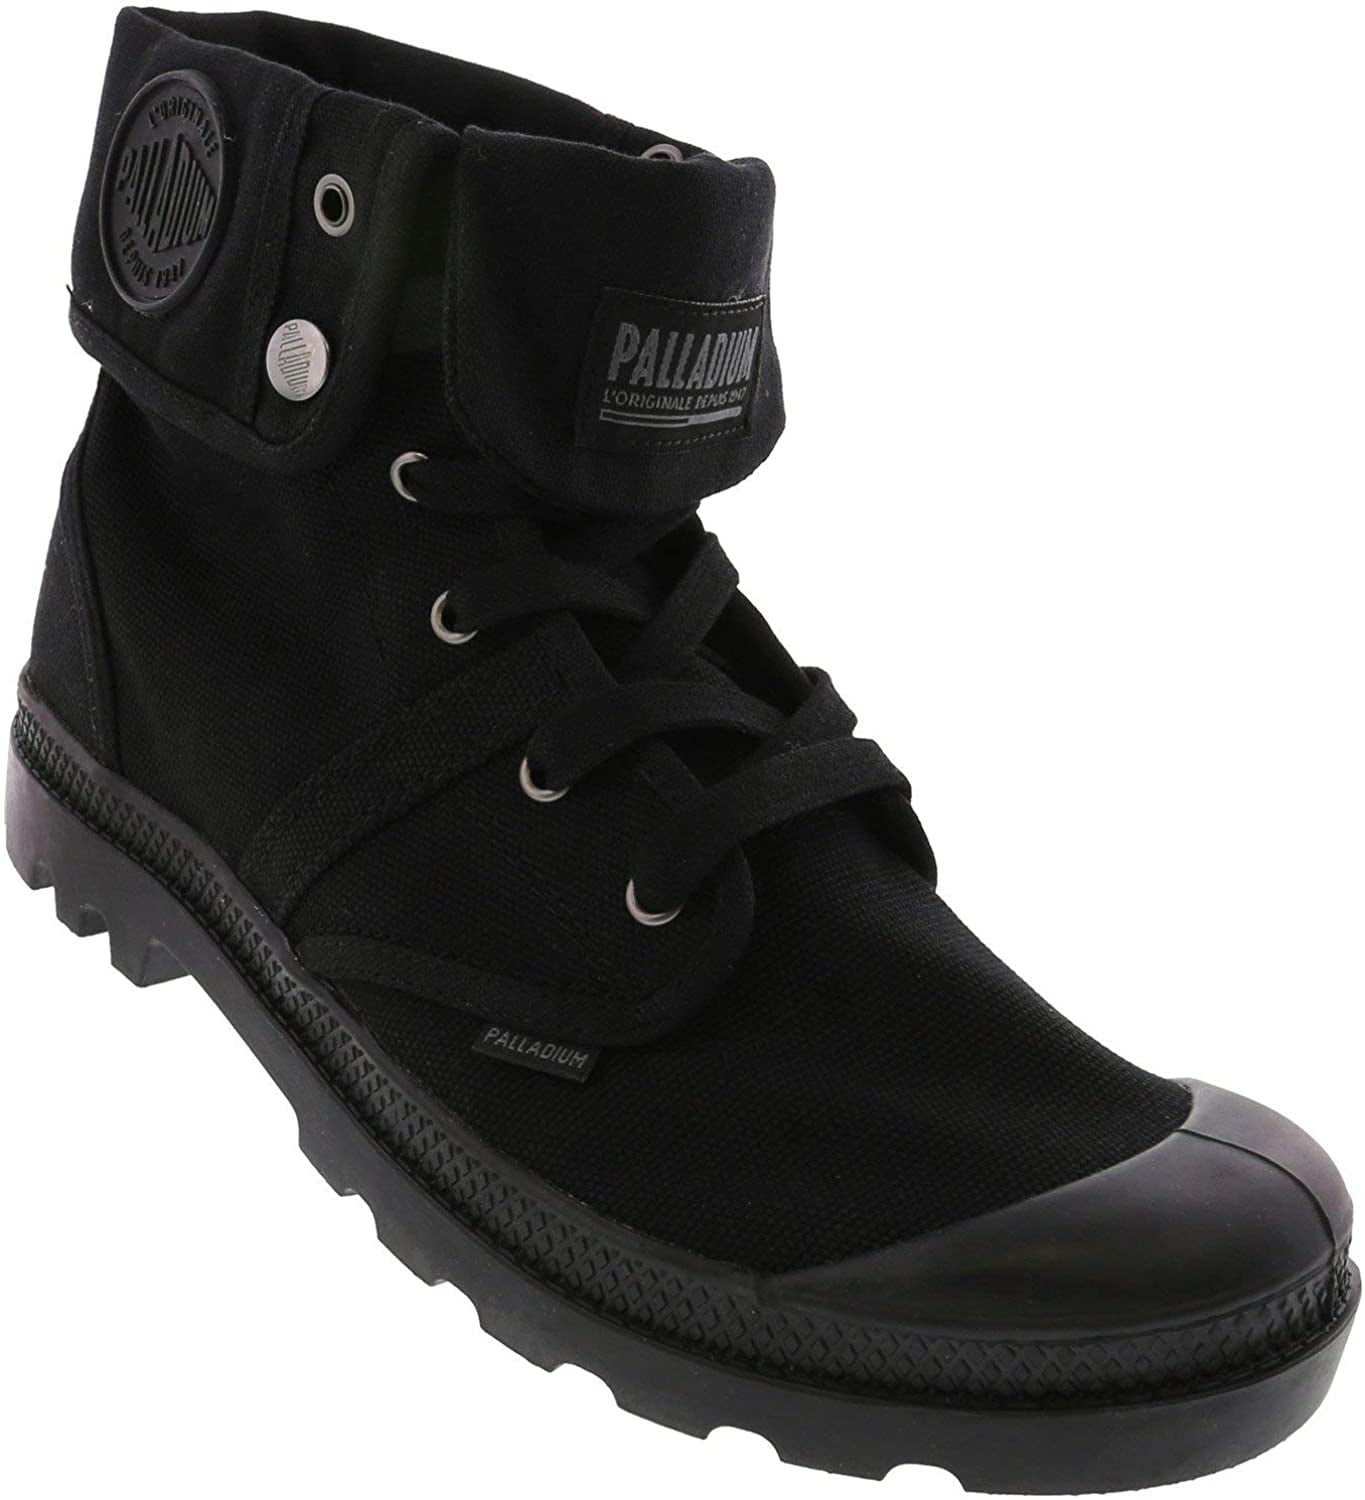 PALLADIUM 034690 01M PALLABROUSE BAGGY  Mn's Black Canvas Casual Boots M 